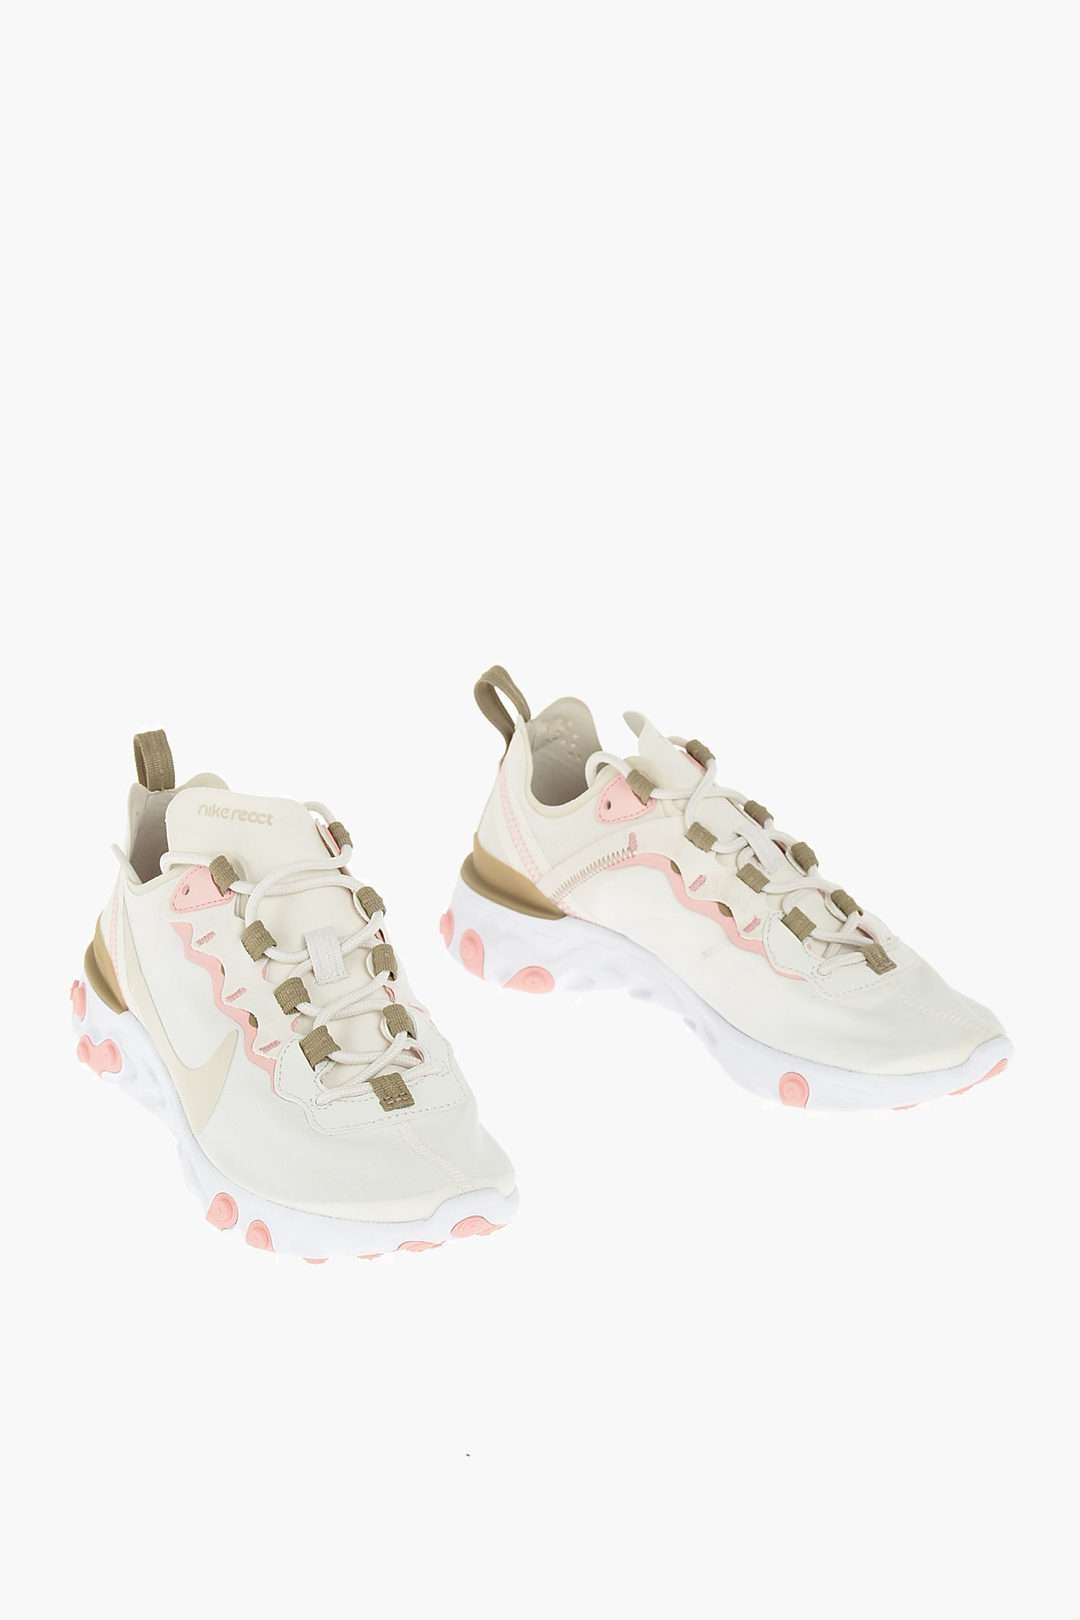 Nike fabric REACT ELEMENT 55 sneakers women Glamood Outlet